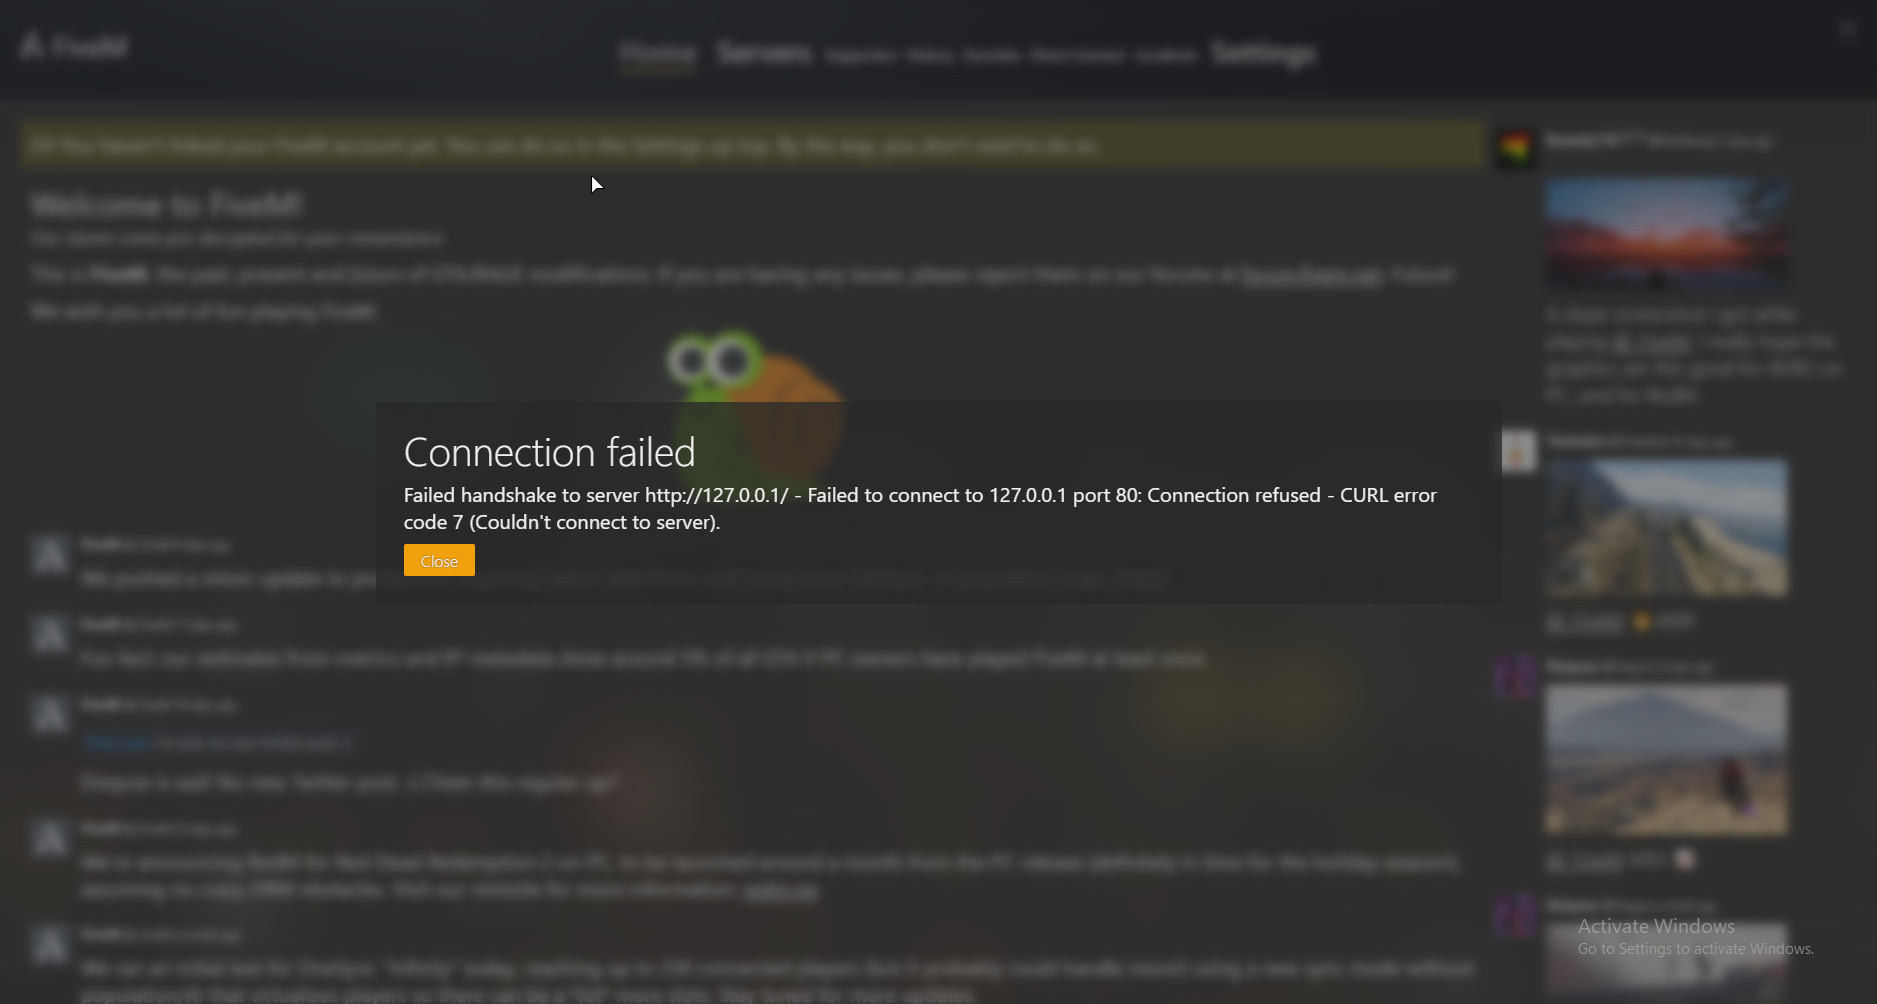 Http://127.0.0.1:7860. Http://127.0.0.1:60337/?. Connection failed. Http://127.0.0.1:50205/?. Curl error 7